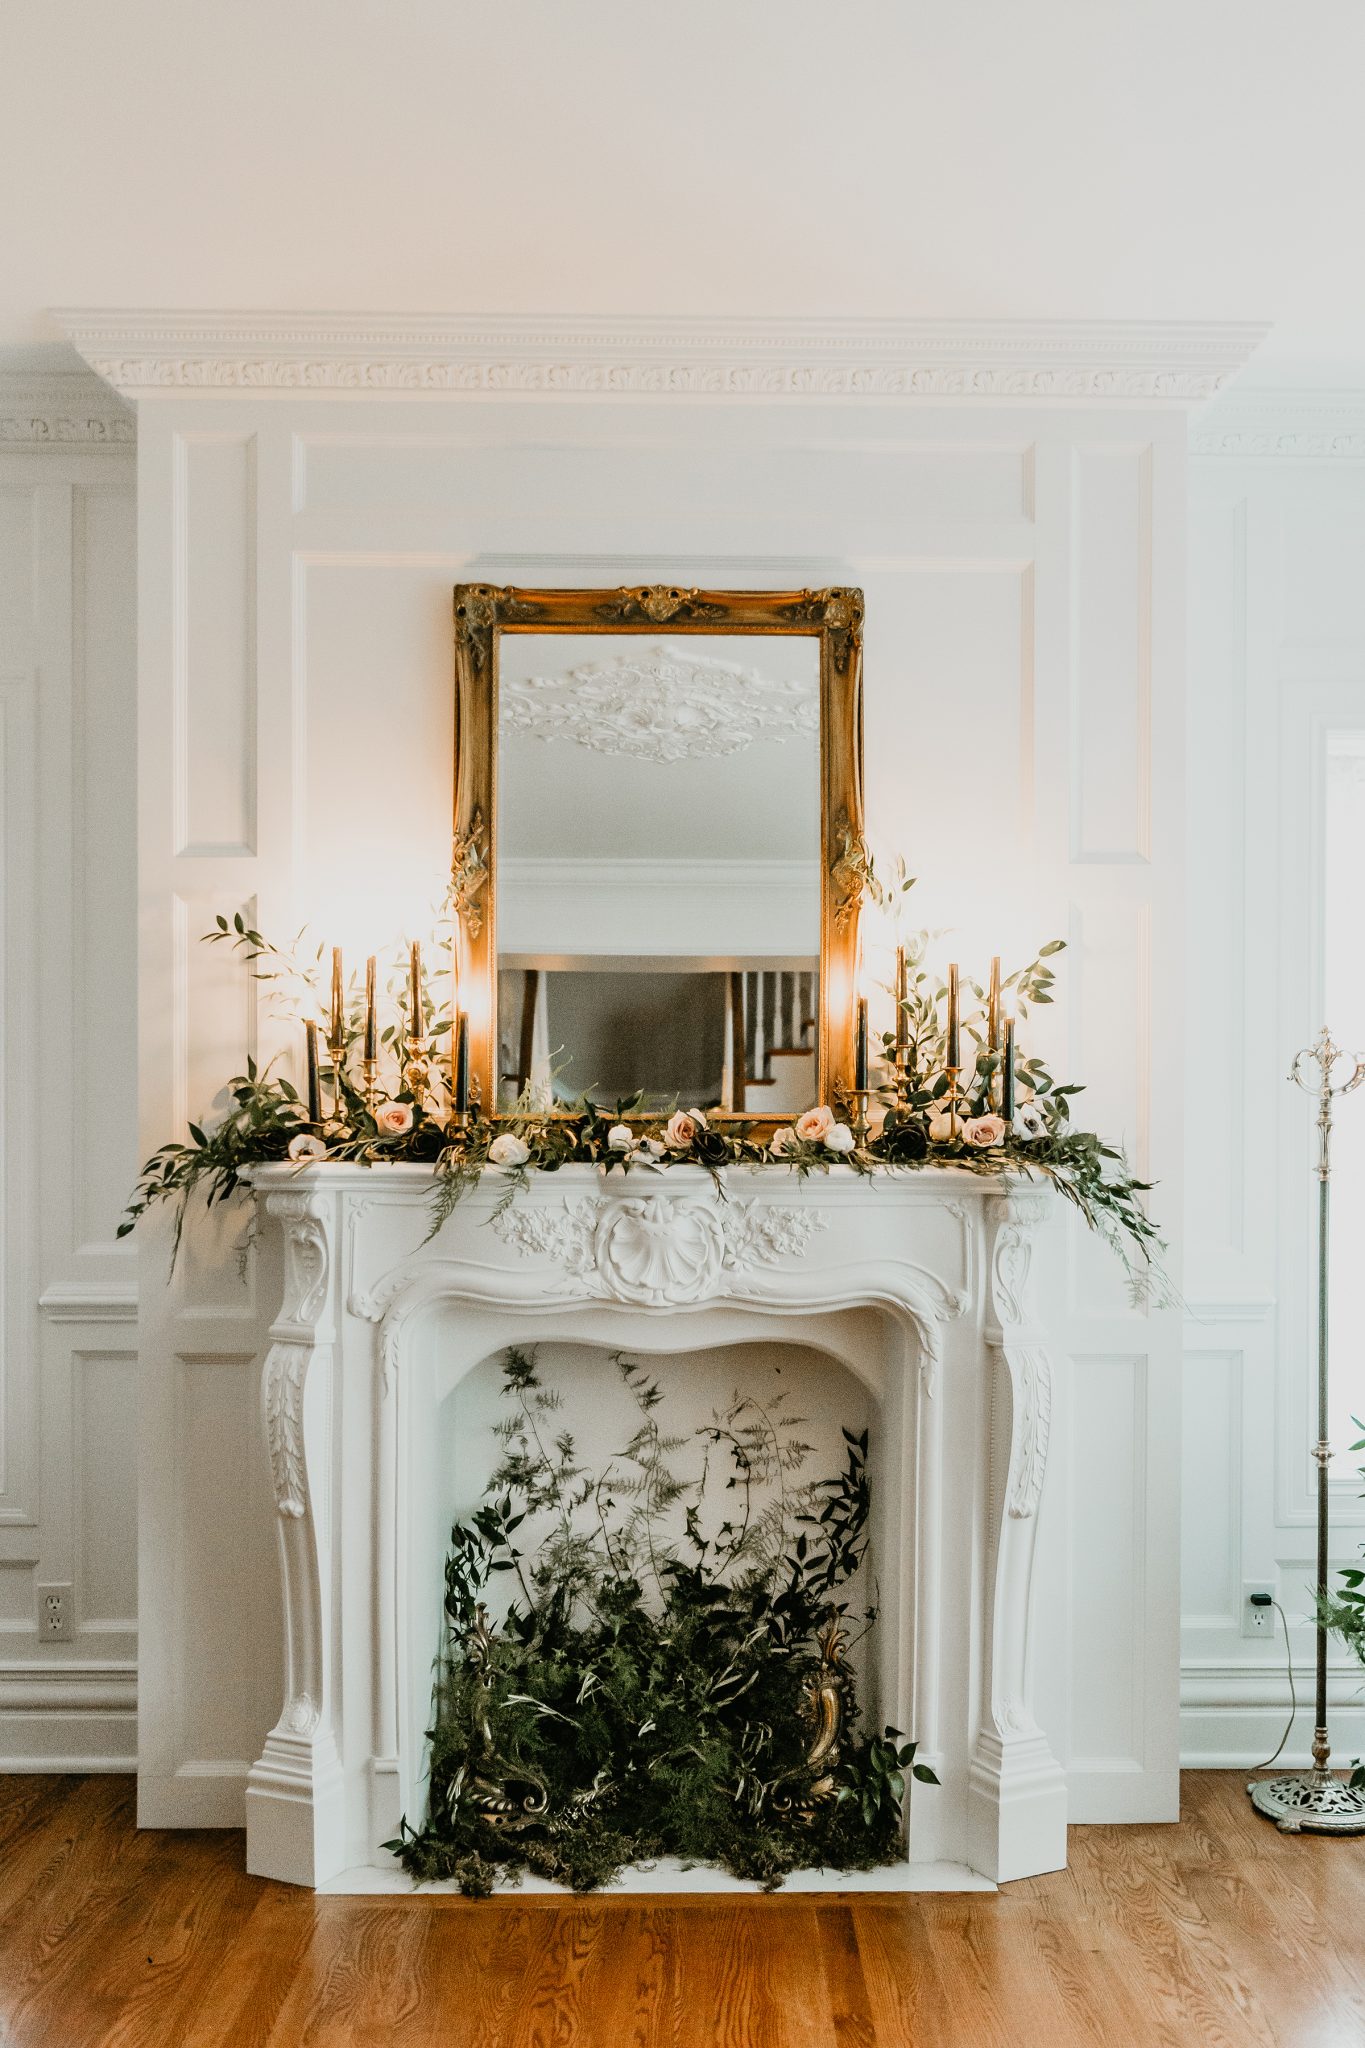 Living room minimony decor inspiration for a vintage styled wedding with greenery in a white fireplace and candles